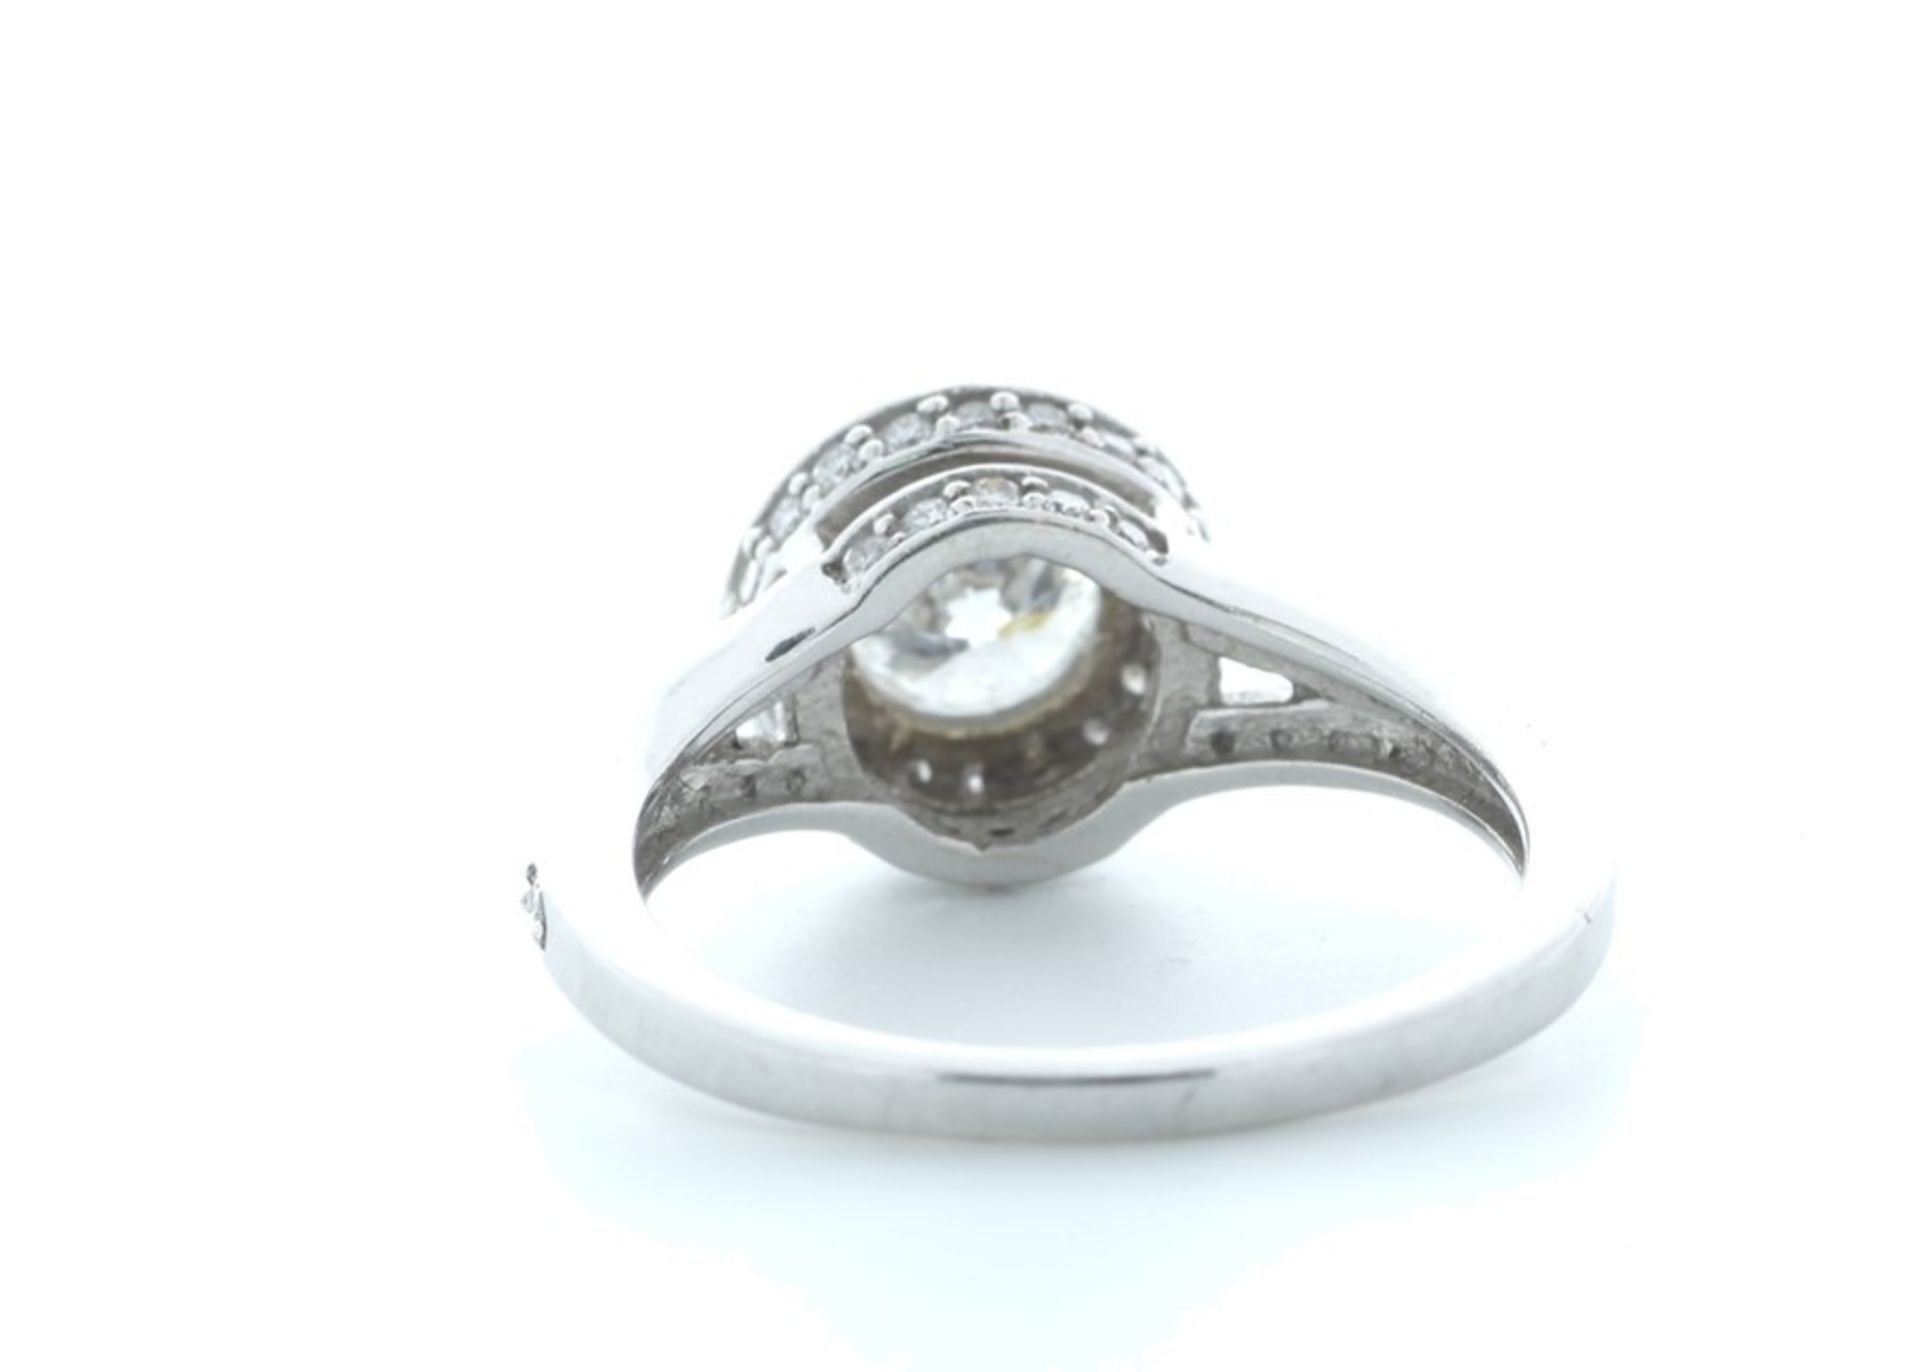 18ct White Gold Single Stone With Halo Setting Ring Valued by IDI £16,000.00 - Image 3 of 5